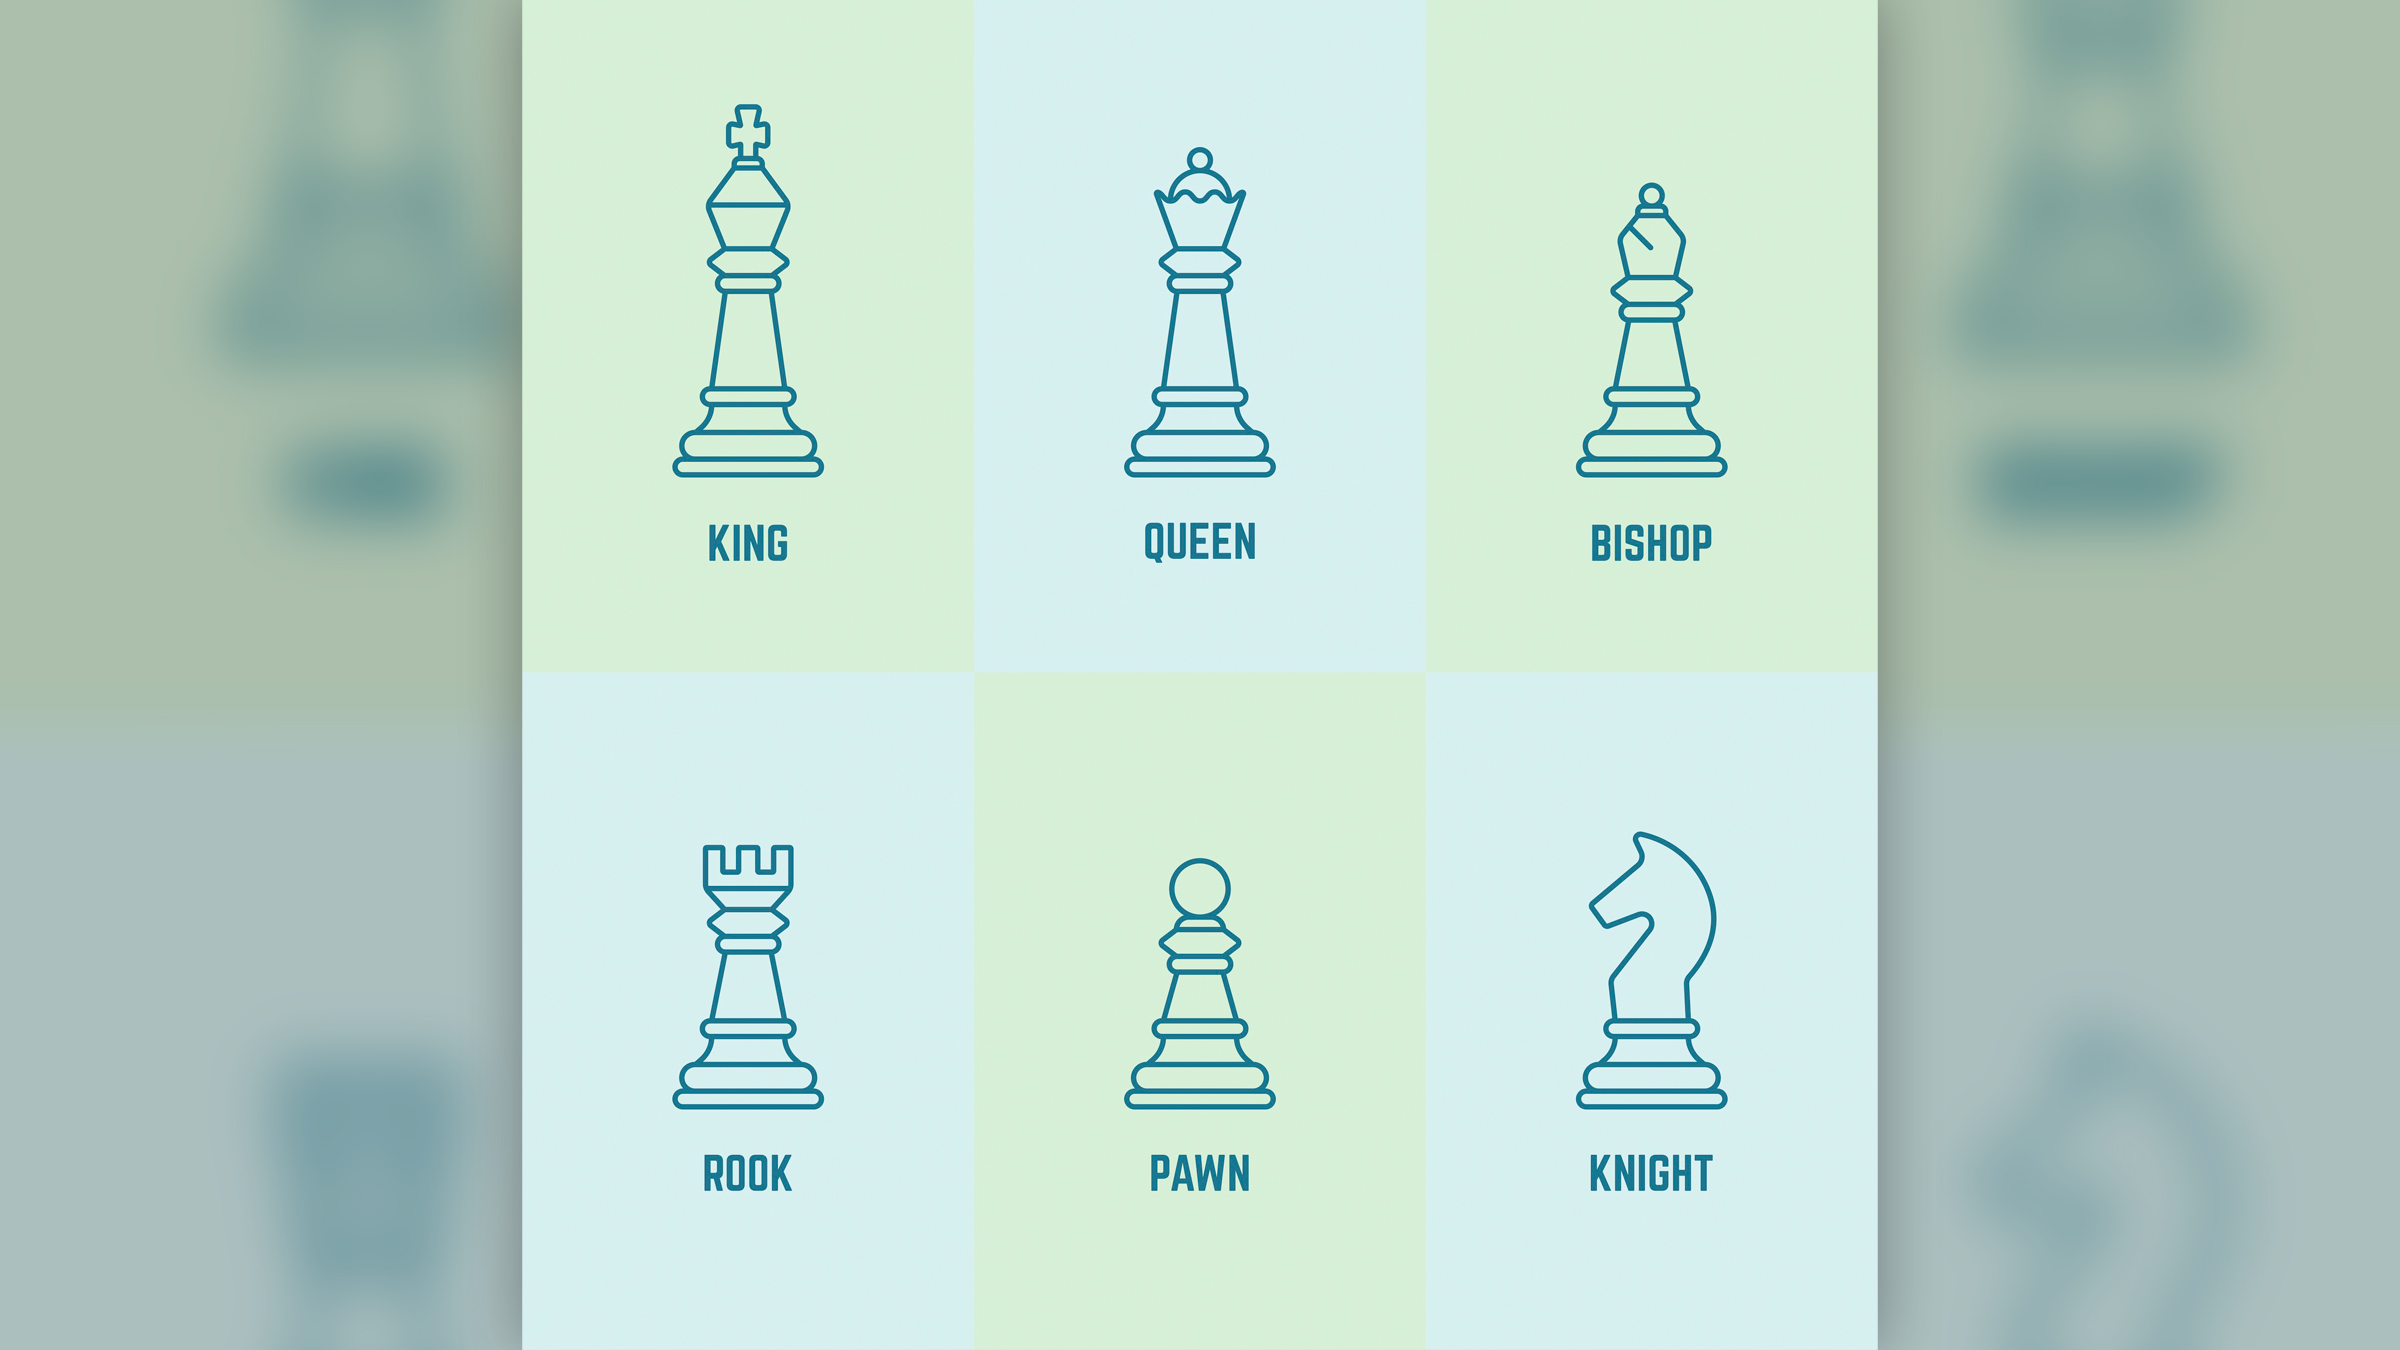 A cartoon image of the different chess pieces.